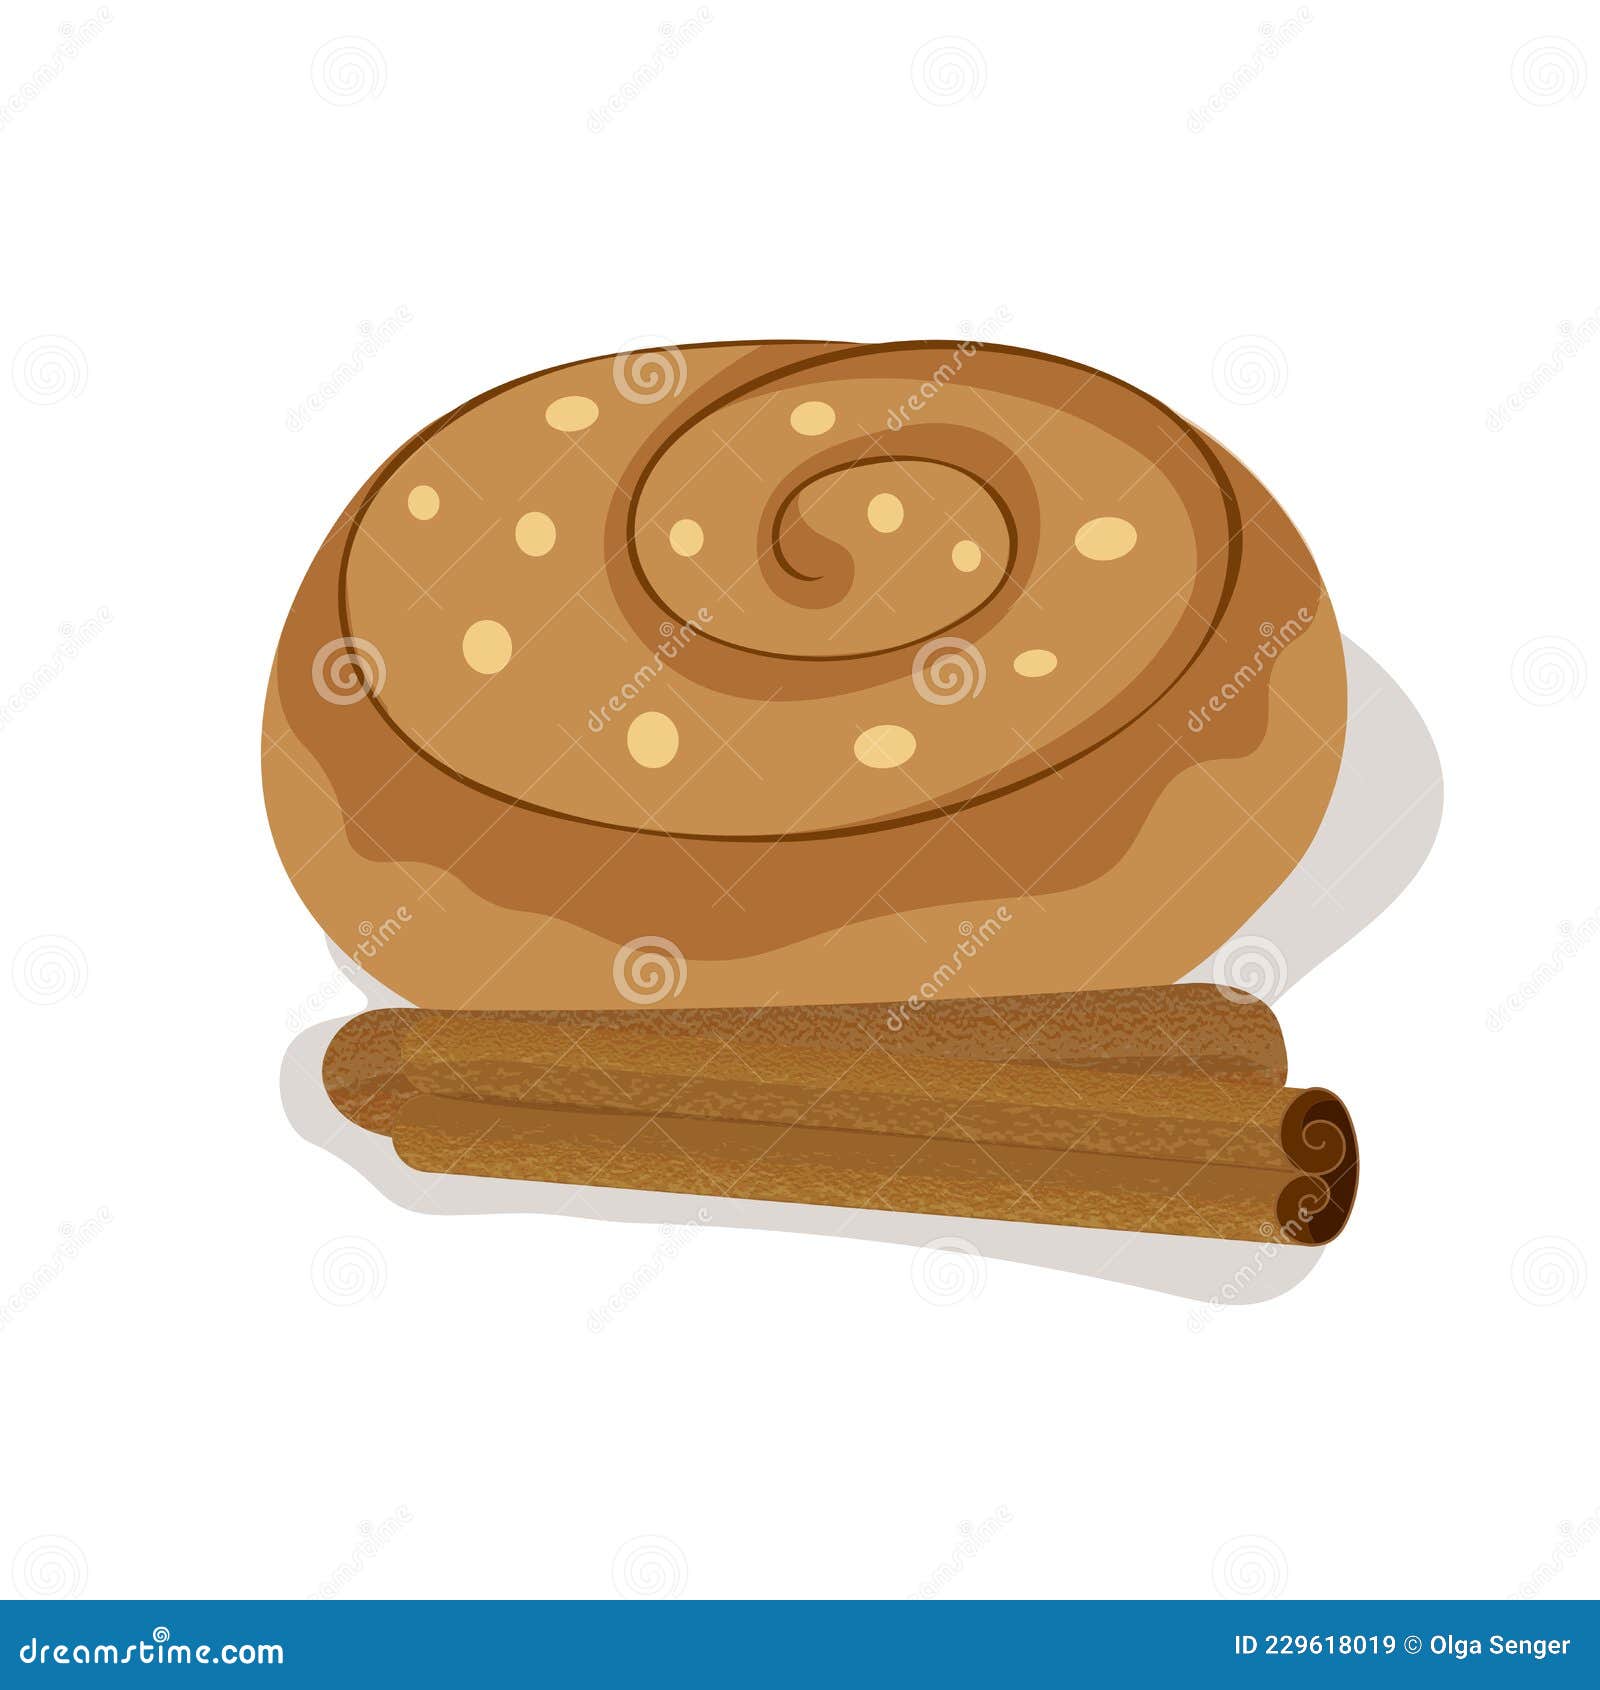 Cinnamon Roll Icon Vector Art, Icons, and Graphics for Free Download